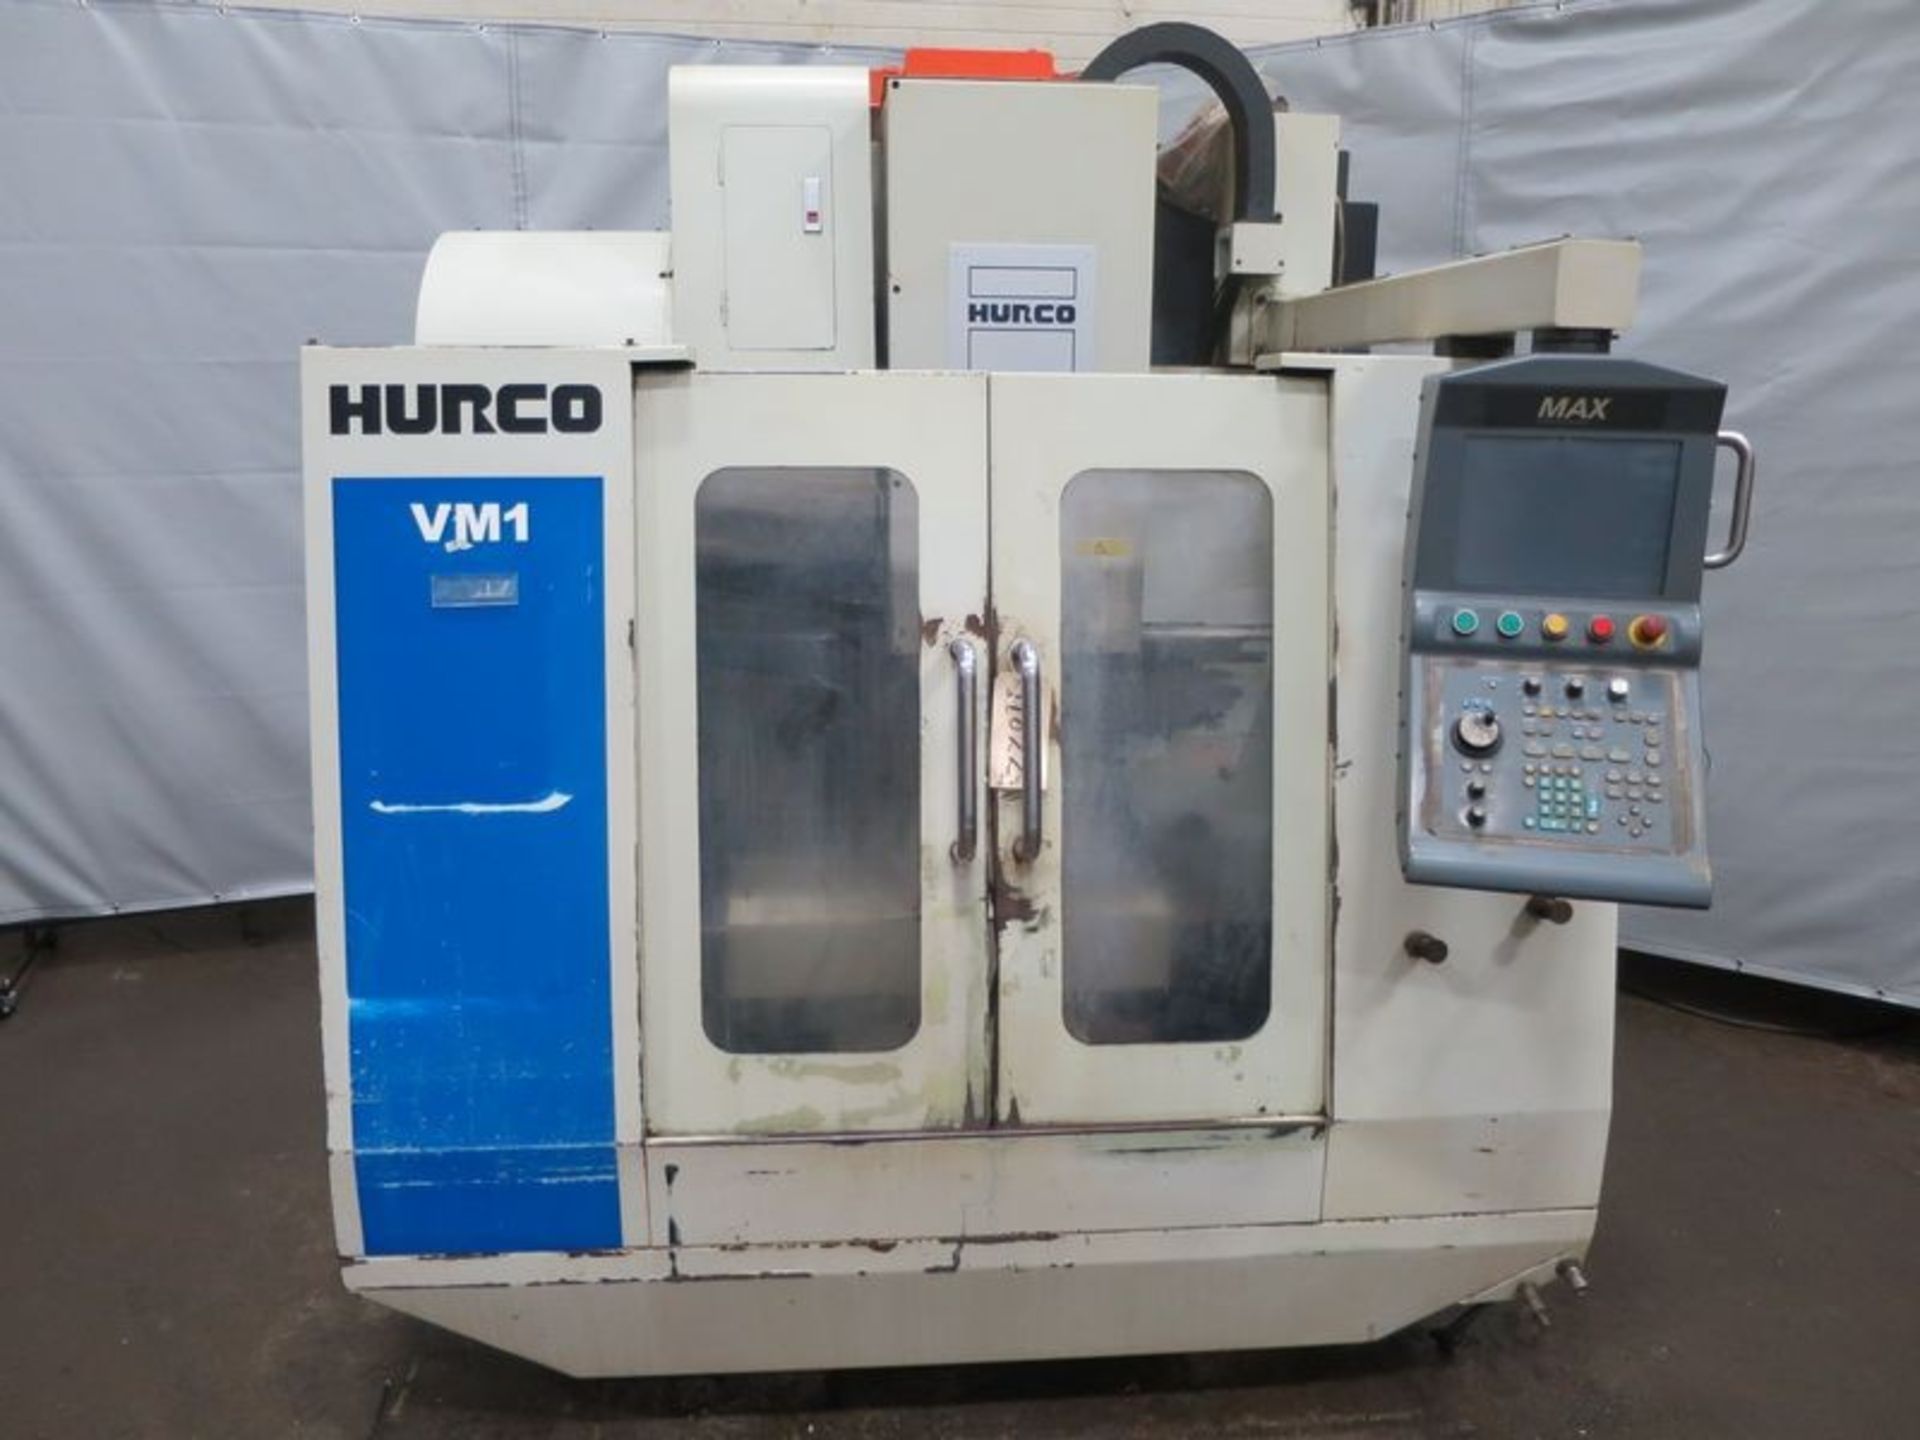 Hurco Model VM1 3-Axis CNC Vertical Machining Center, S/N 06301115BHA General Specifications,